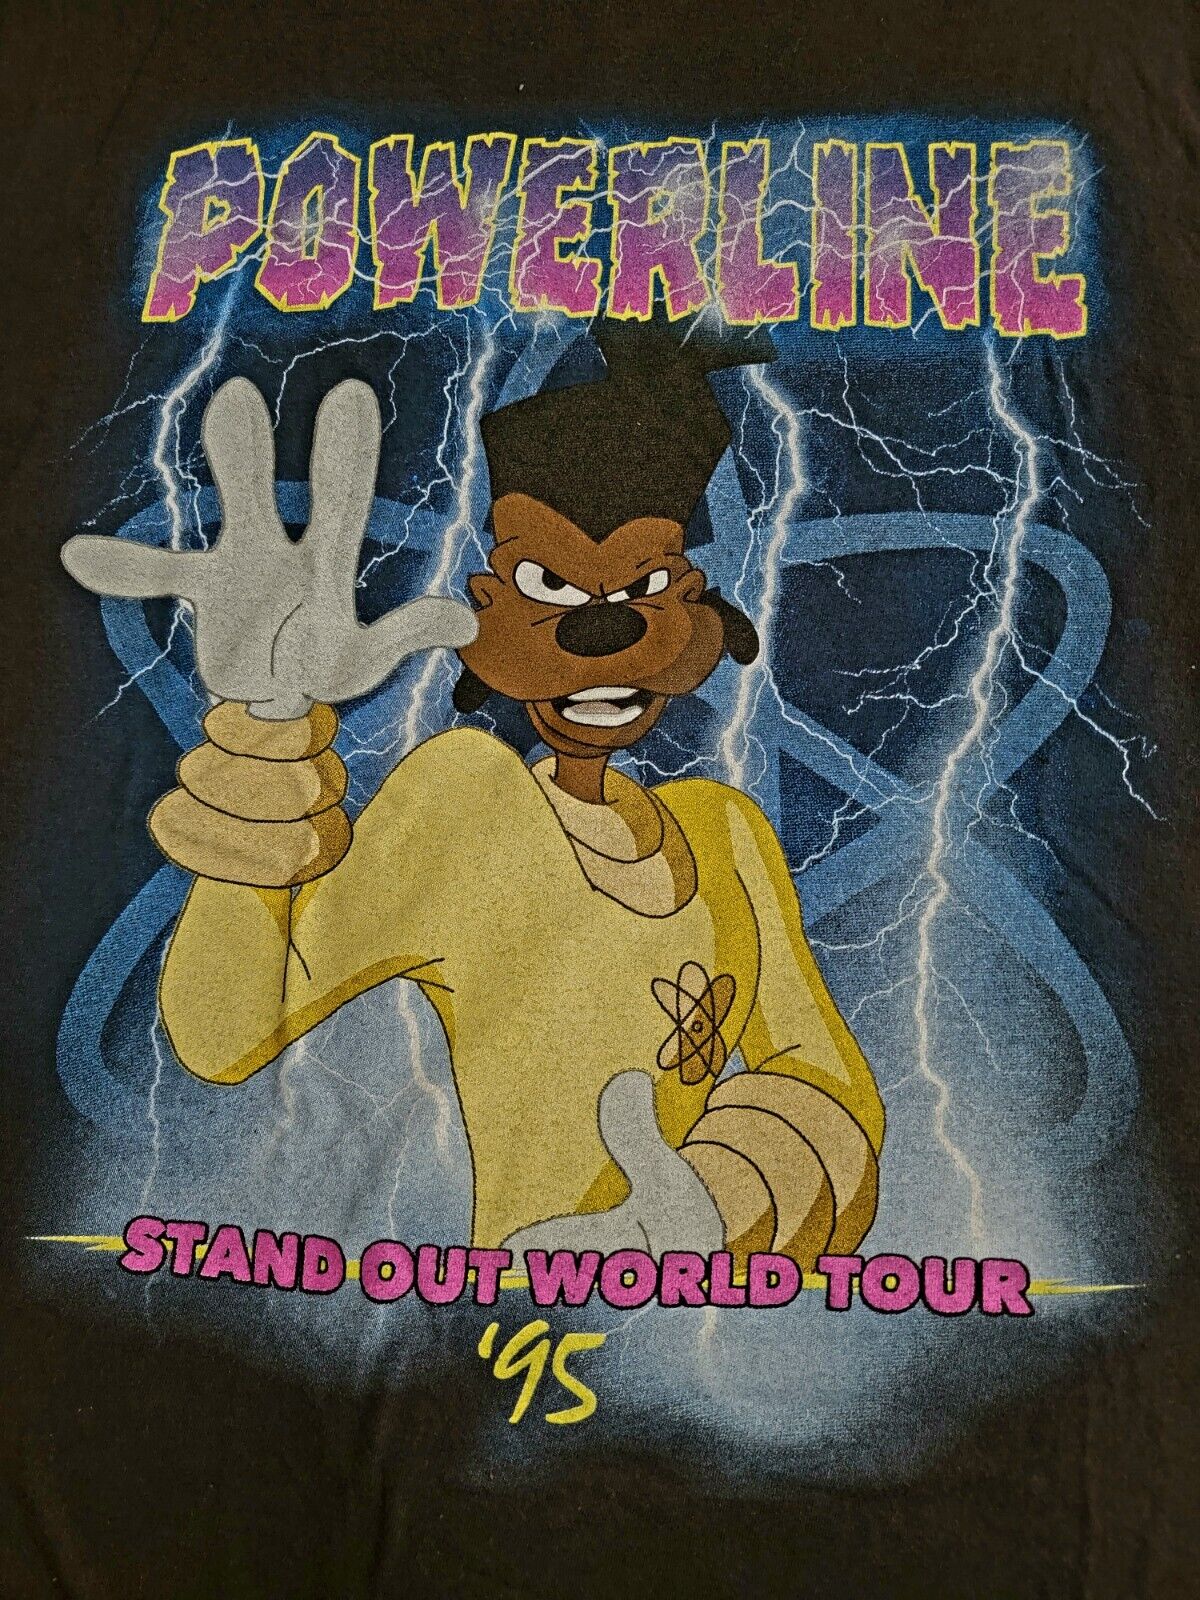 Vintage Disney Powerline 1995 Stand Out World Tour Shirt Adult Small Goofy Movie